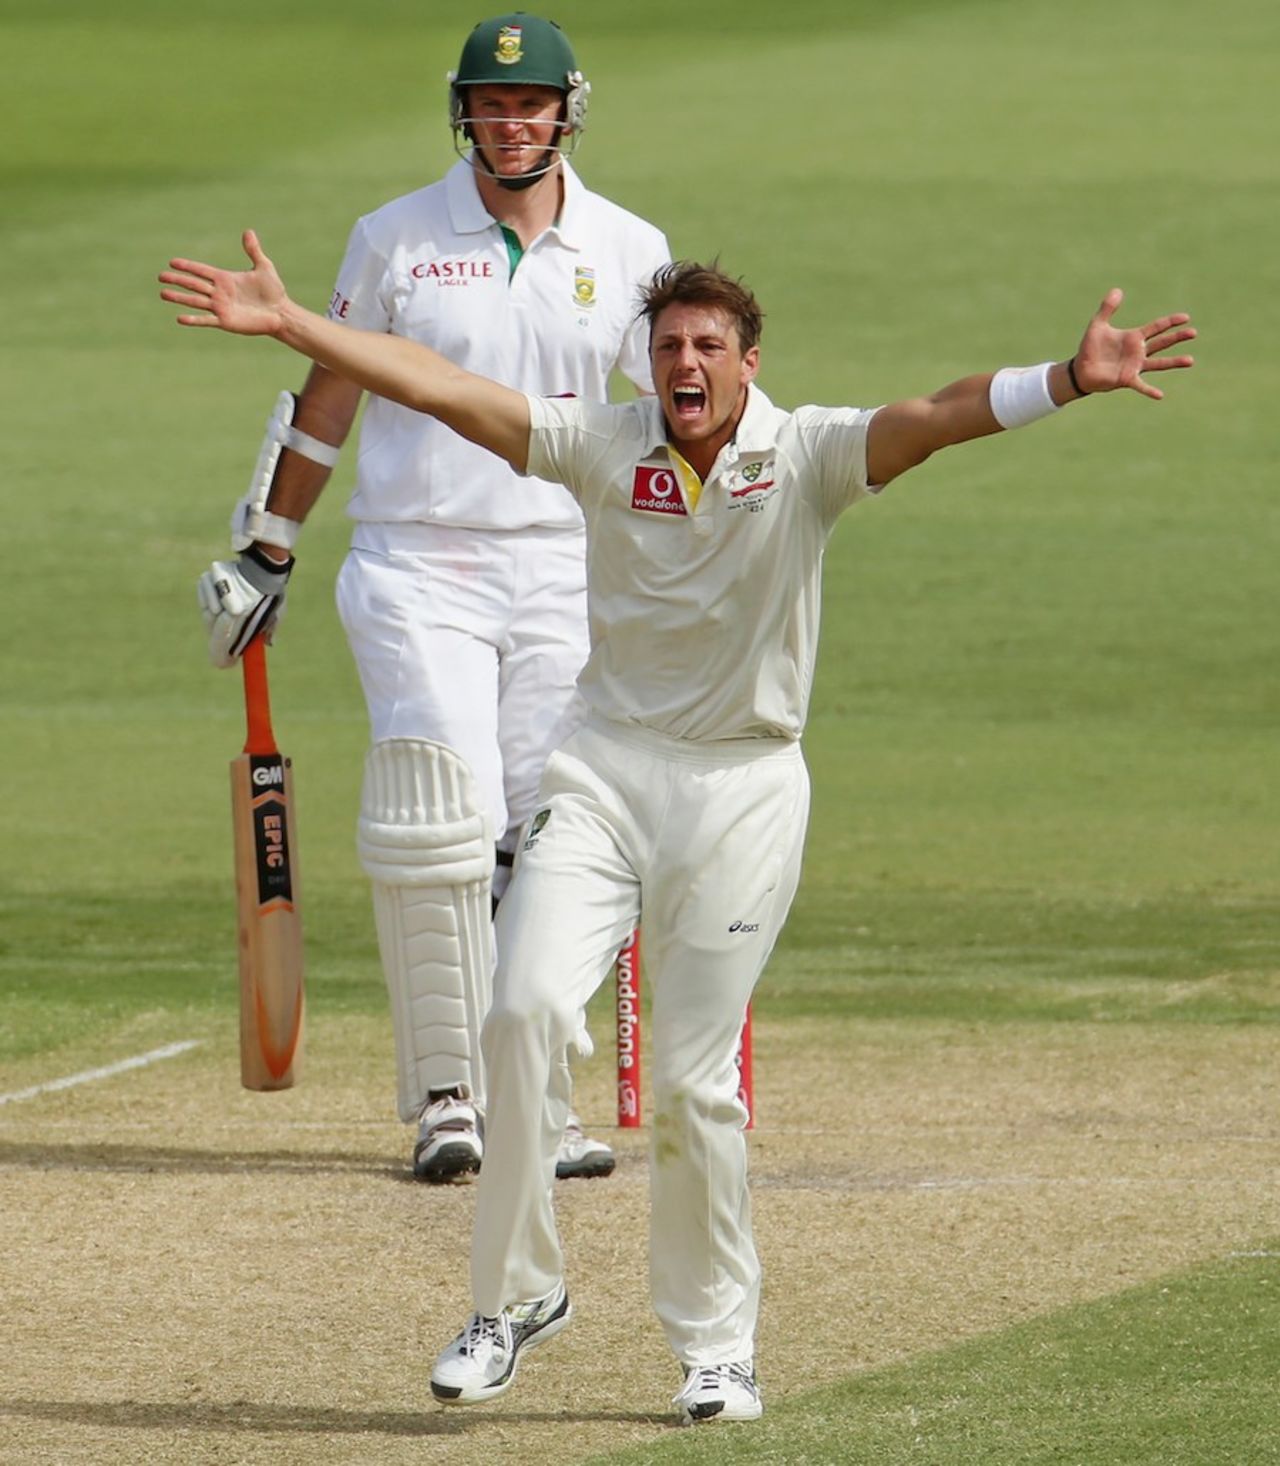 James Pattinson appeals for caught behind against Graeme Smith, Australia v South Africa, 2nd Test, Adelaide, 2nd day, November 23, 2012